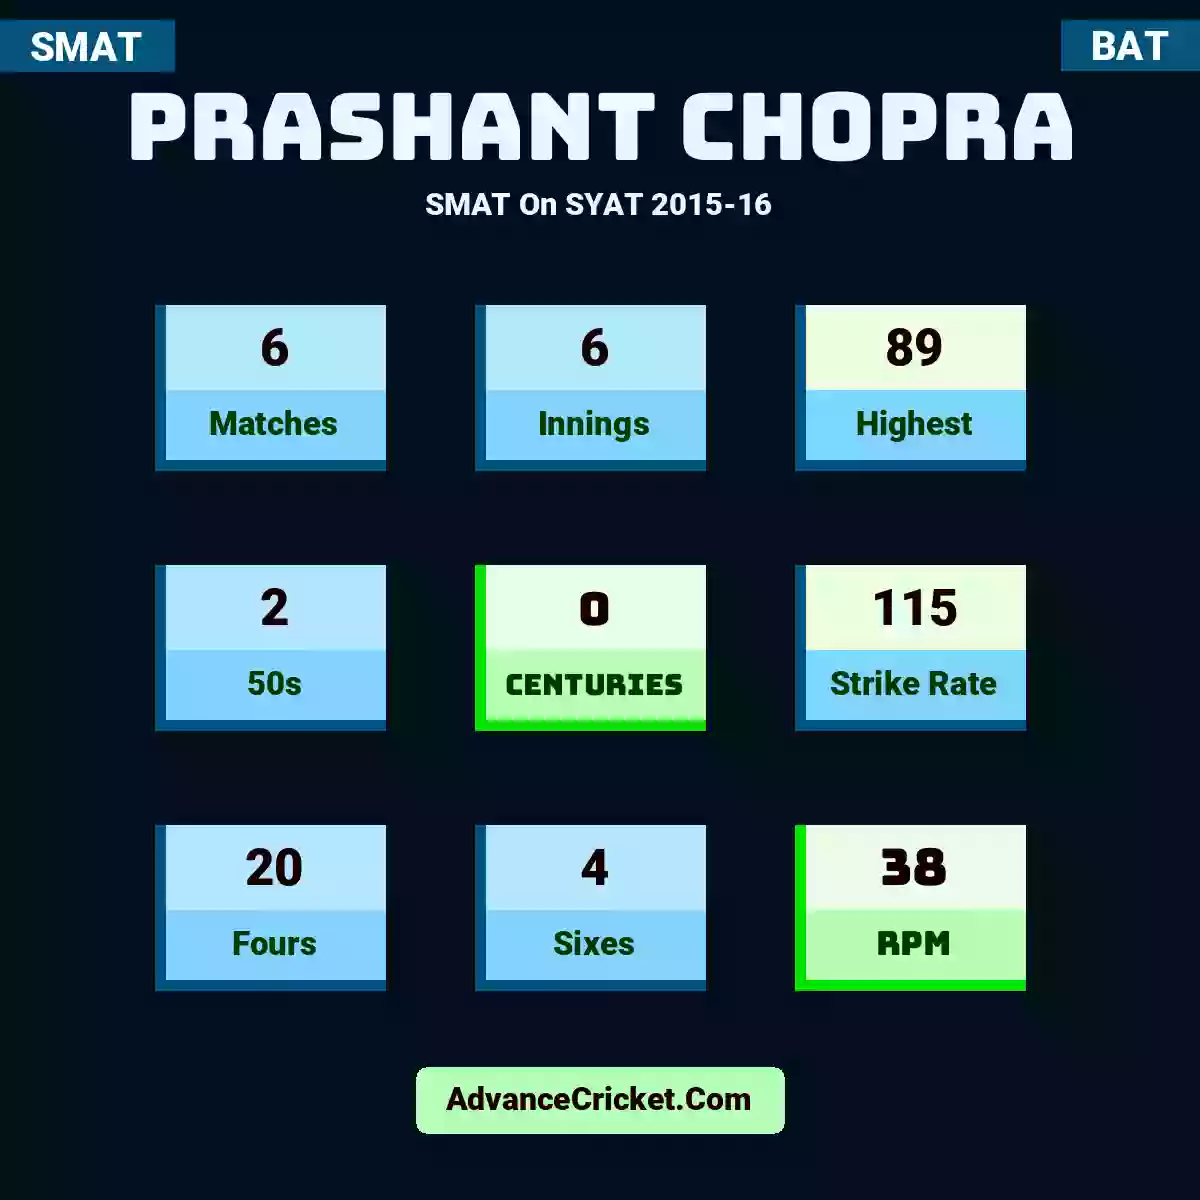 Prashant Chopra SMAT  On SYAT 2015-16, Prashant Chopra played 6 matches, scored 89 runs as highest, 2 half-centuries, and 0 centuries, with a strike rate of 115. P.Chopra hit 20 fours and 4 sixes, with an RPM of 38.